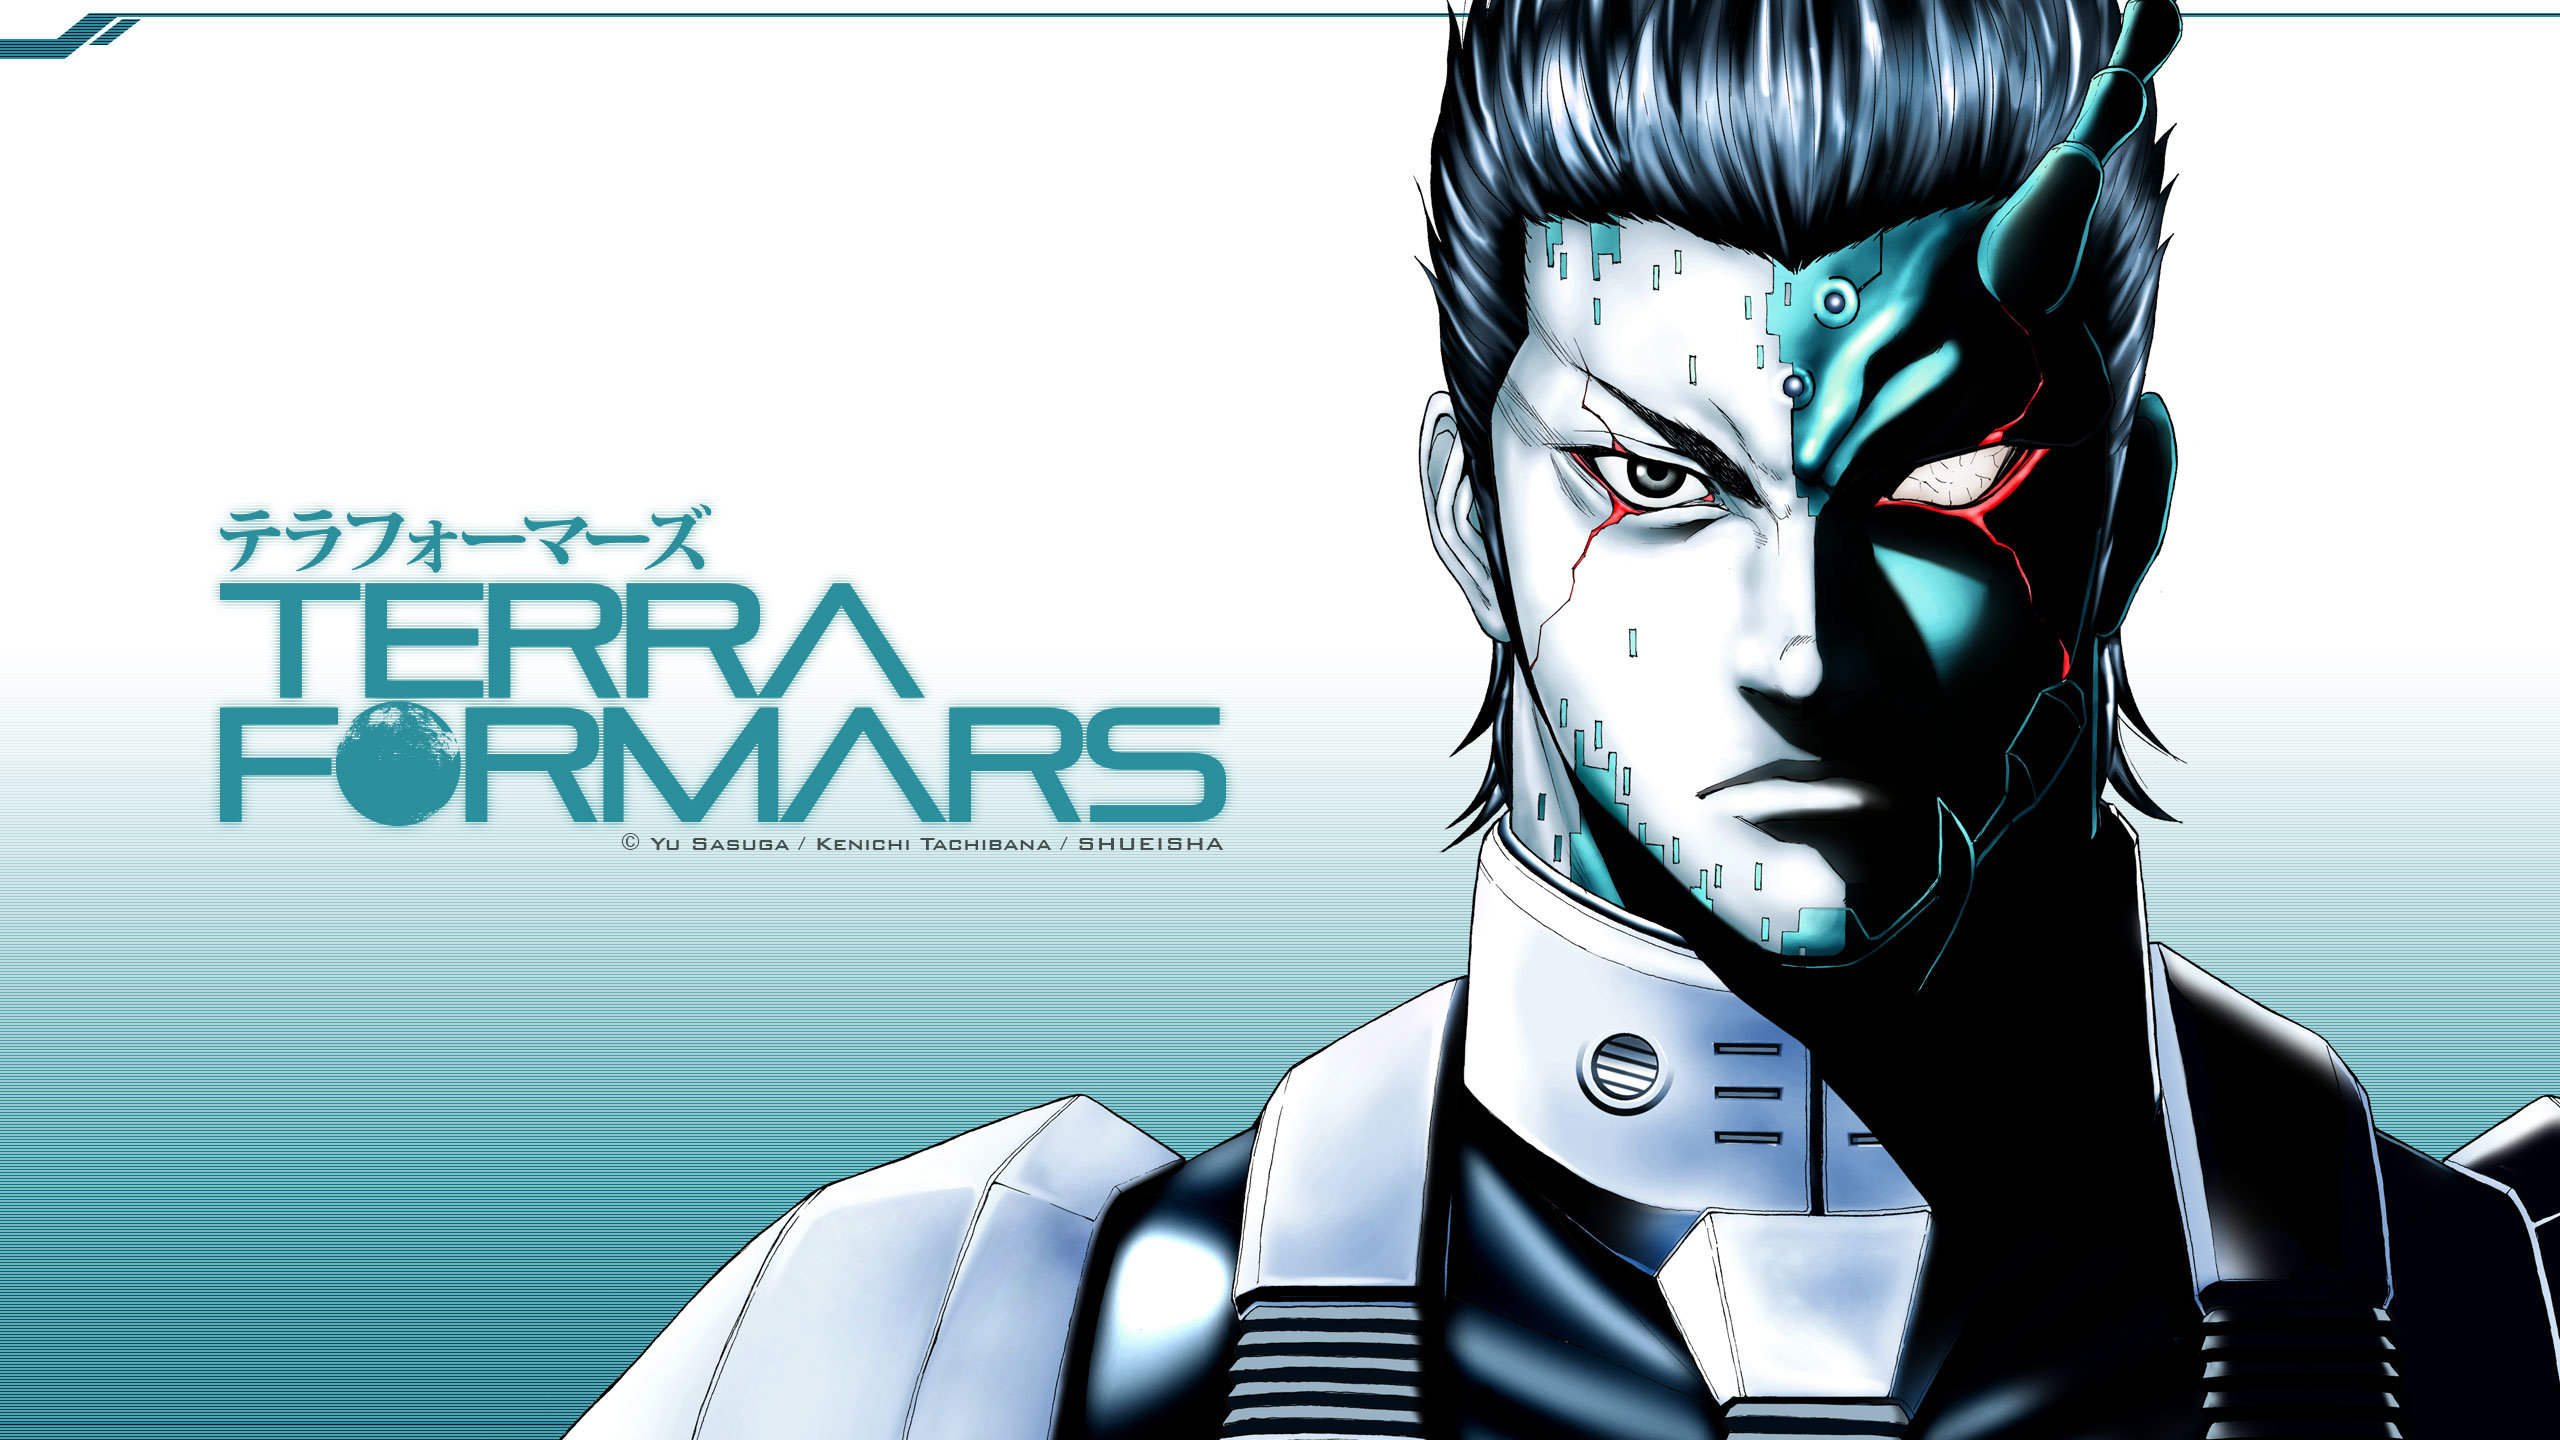 Download hd 2560x1440 Terra Formars PC background ID:25502 for free